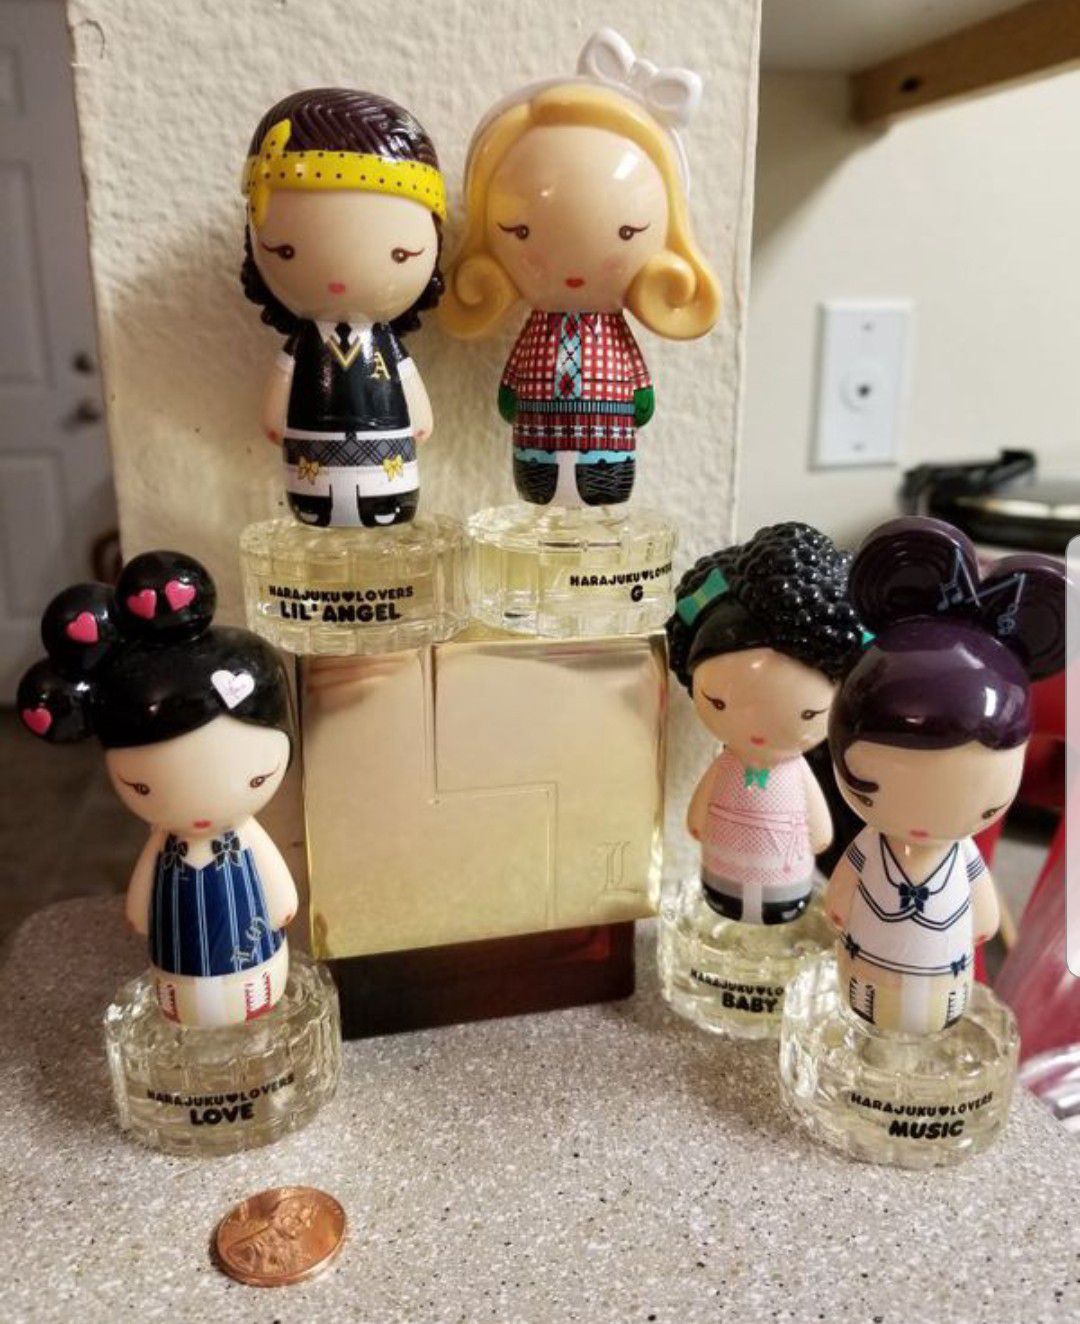 Gwen Stefani Perfume for Sale in OR, US - OfferUp